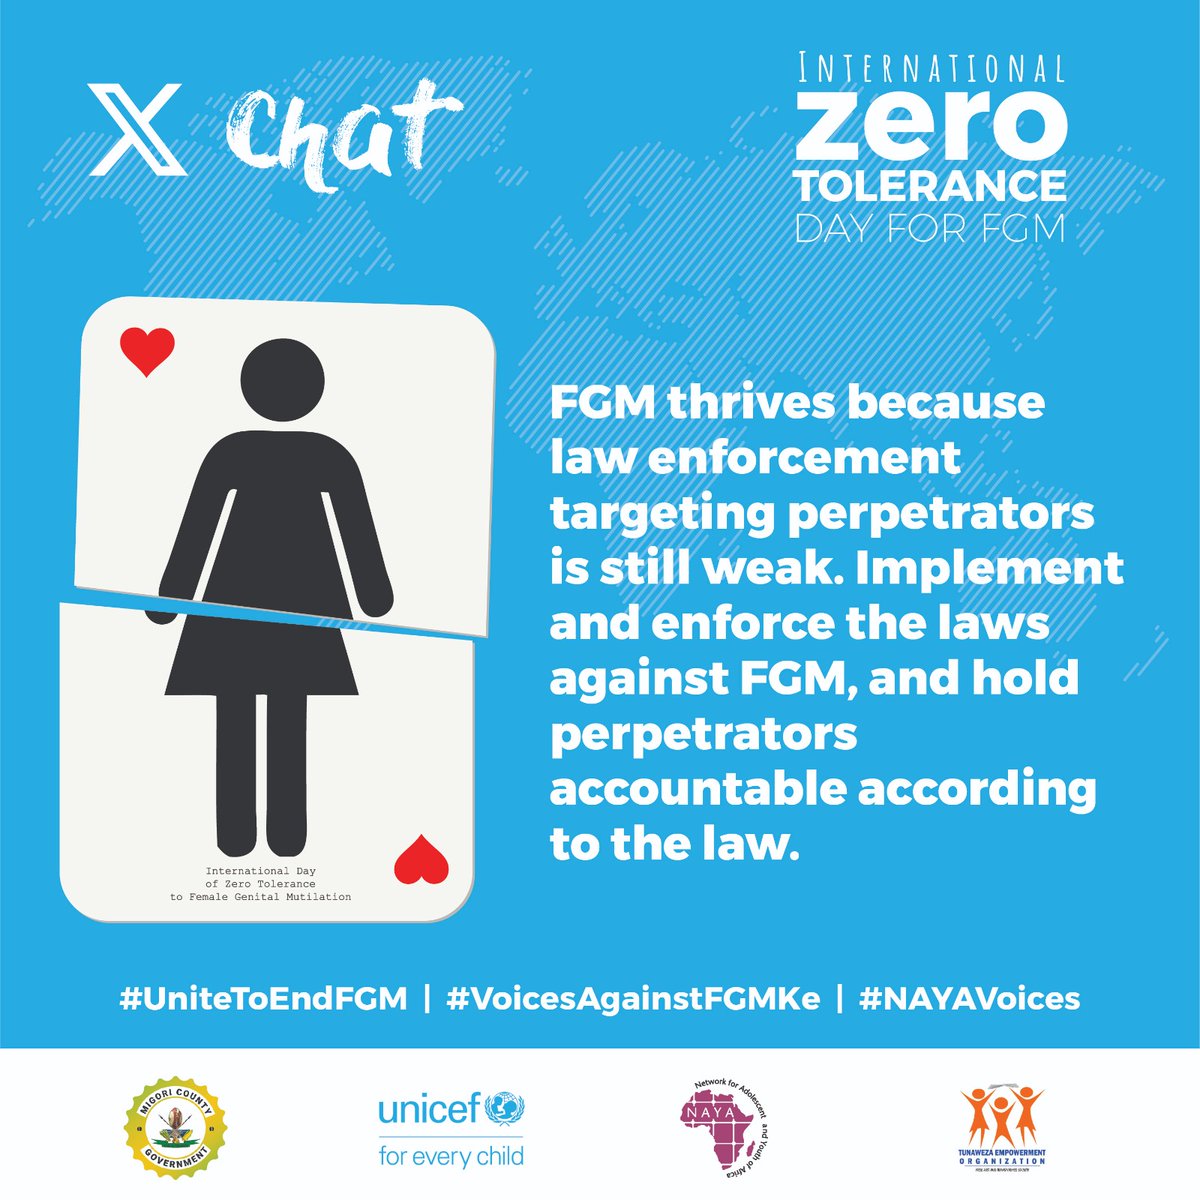 Let's reaffirm our commitment to protecting the rights of girls and women in Kenya. Say NO to FGM on the International Day of Zero Tolerance for FGM. Together, we can create a safer, healthier future for all. 
#UnitedToEndFGM 
#VoicesAgainstFGMKe 
#NAYAVoices